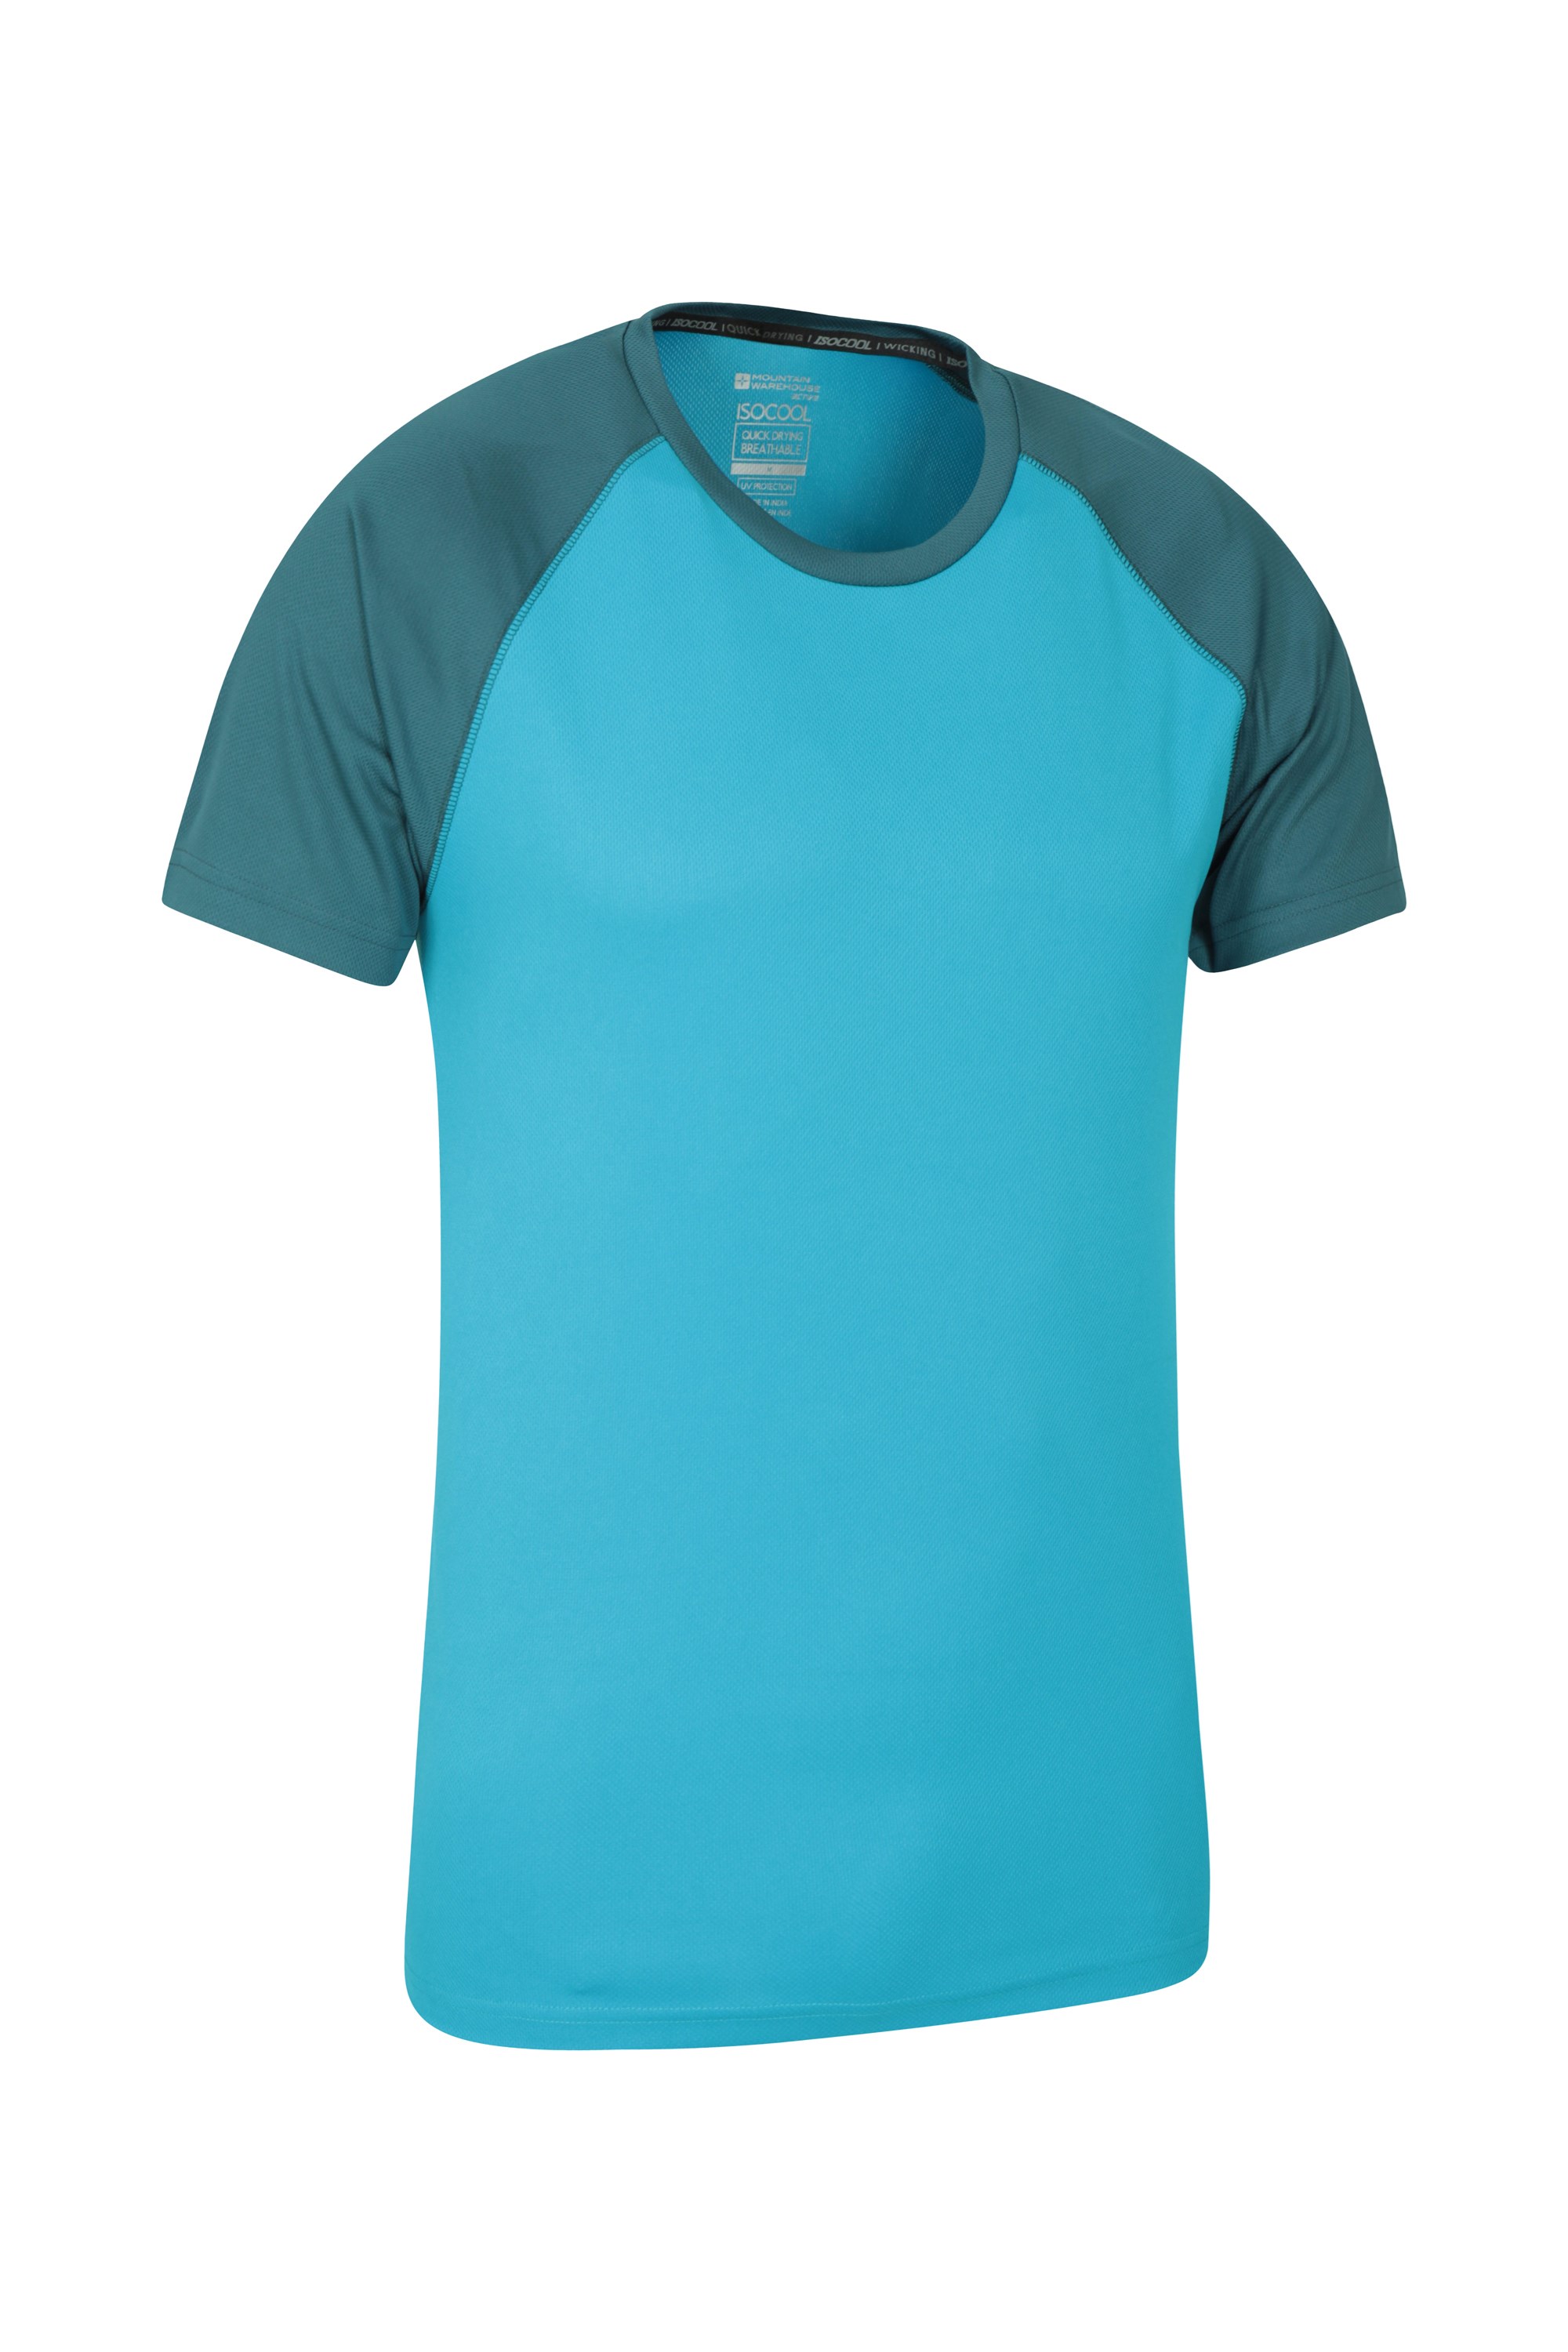 Comfortable & Quick Drying Top Lightweight Shirt Travelling for Gym Mountain Warehouse Endurance Mens T-Shirt – Breathable Summer Tee UPF50 Protection Running